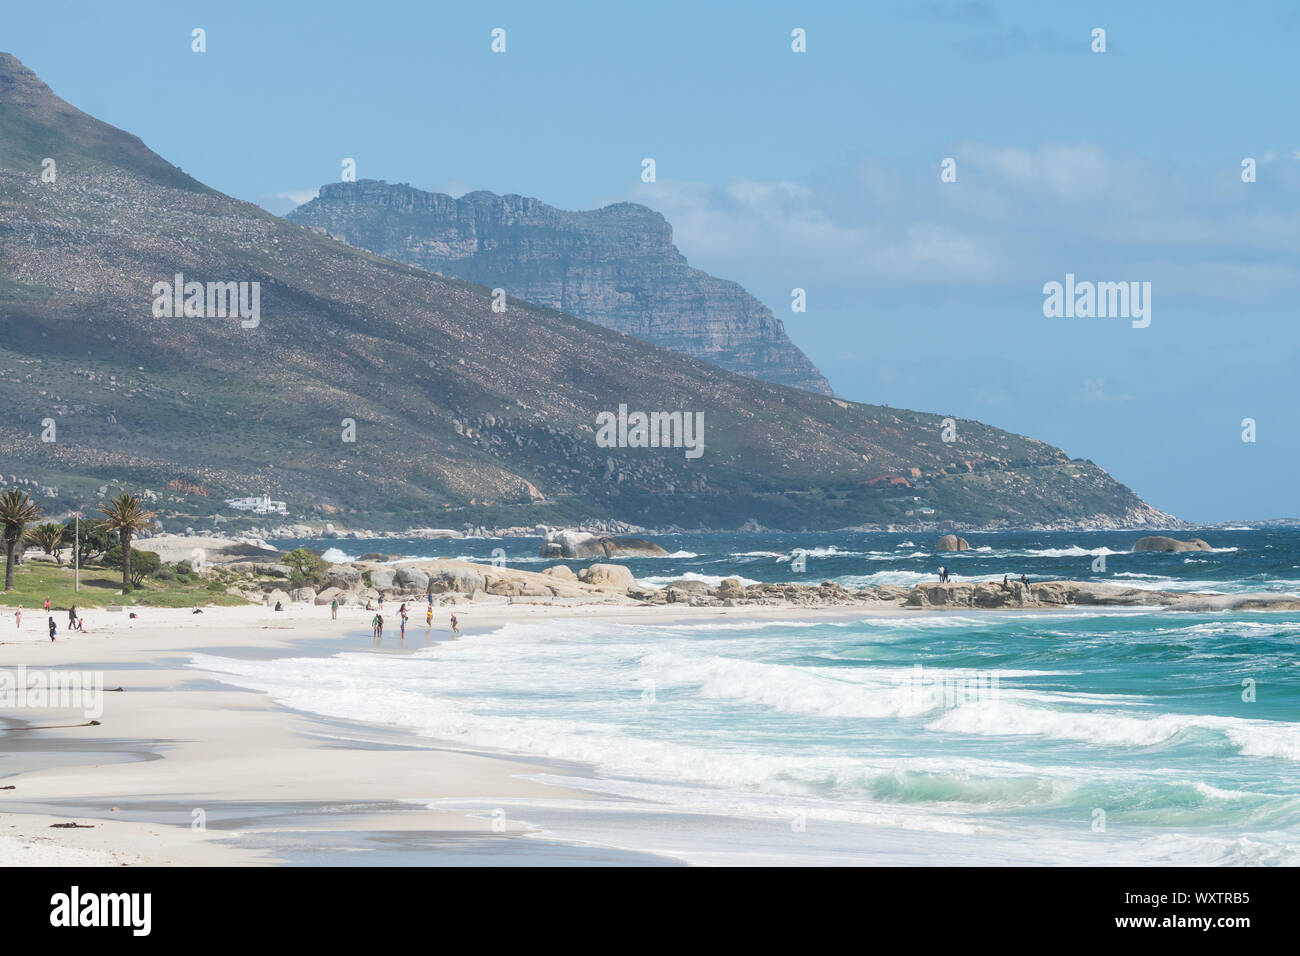 Camps Bay landscape and seascape of white sandy blue flag beach and turquoise water of the Atlantic ocean with beachgoers in Cape Town, South Africa Stock Photo